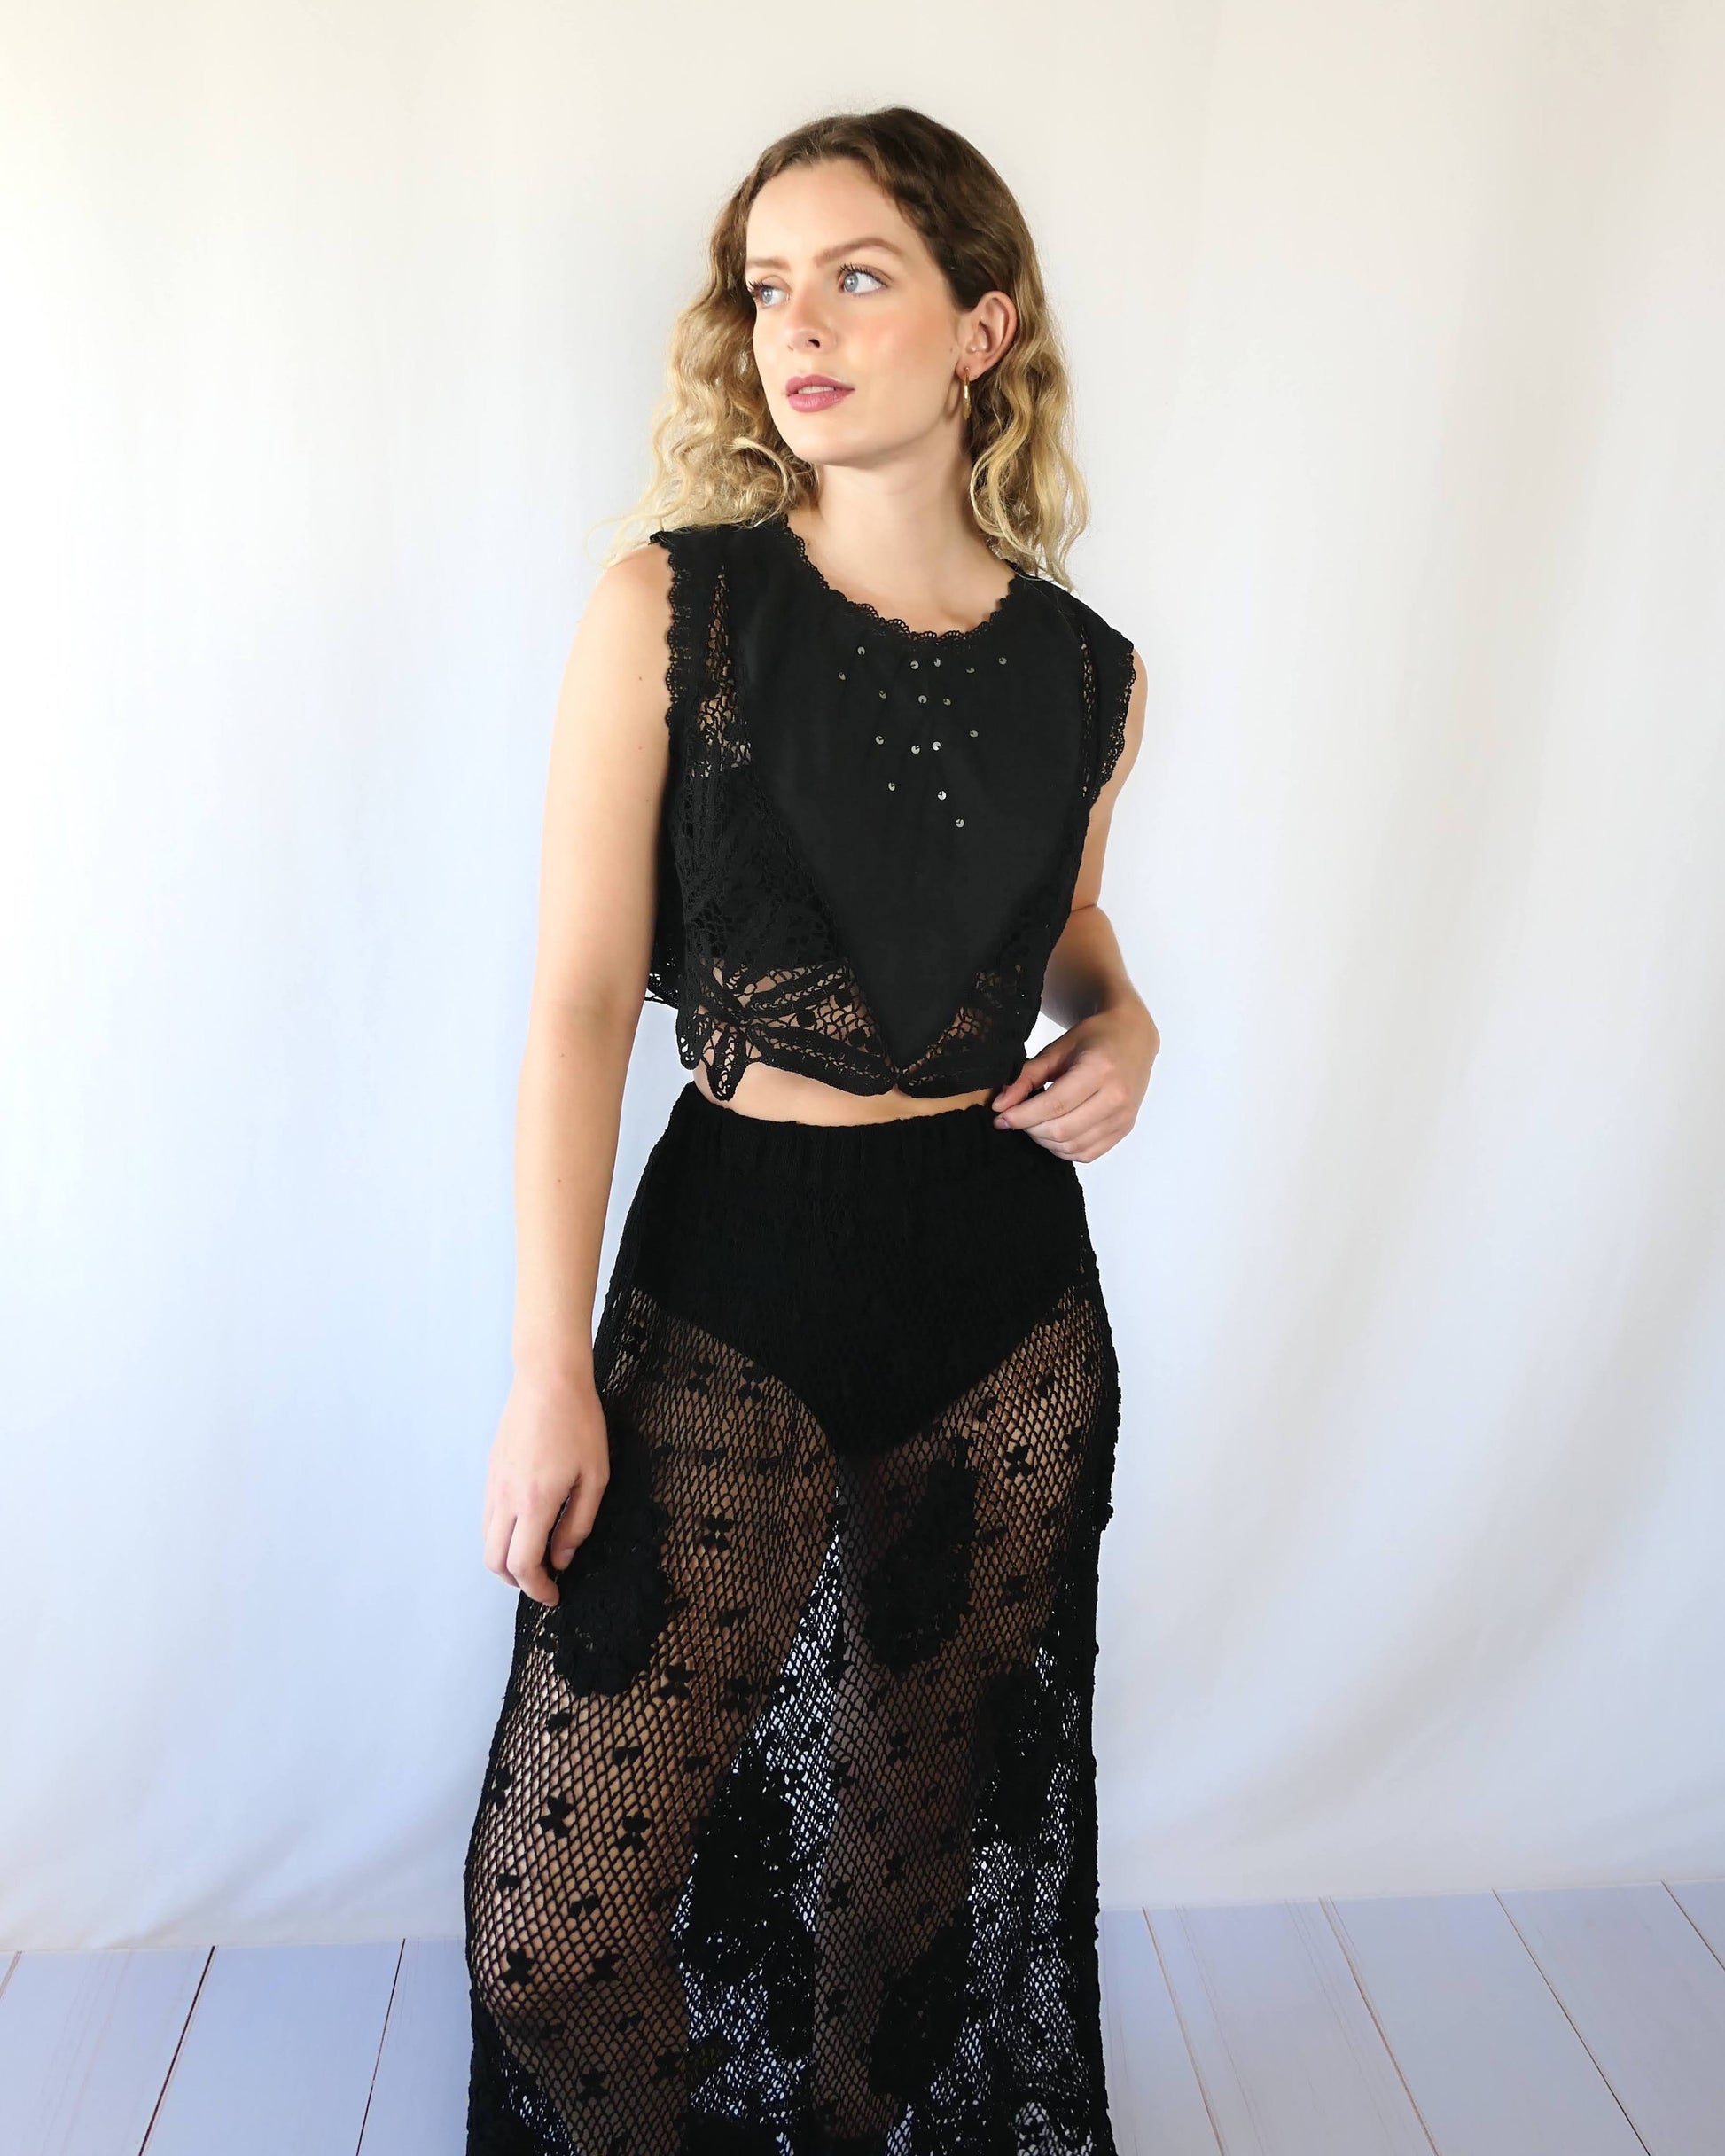 Rock on with this seductive black tank crop top made of vintage fabric with embroidered detail, sequins, and beautiful hand crochet work. Wear it together with one of our Lim's Vintage black crochet maxi length skirts for a festive goth vibe, or pair it with a black skirt or jeans and boots or sandals for a more casual look.  Measurements:  Bust 37” Waist 36" Length 15” Size: Small to Medium  Color: Black  Material: 100% cotton